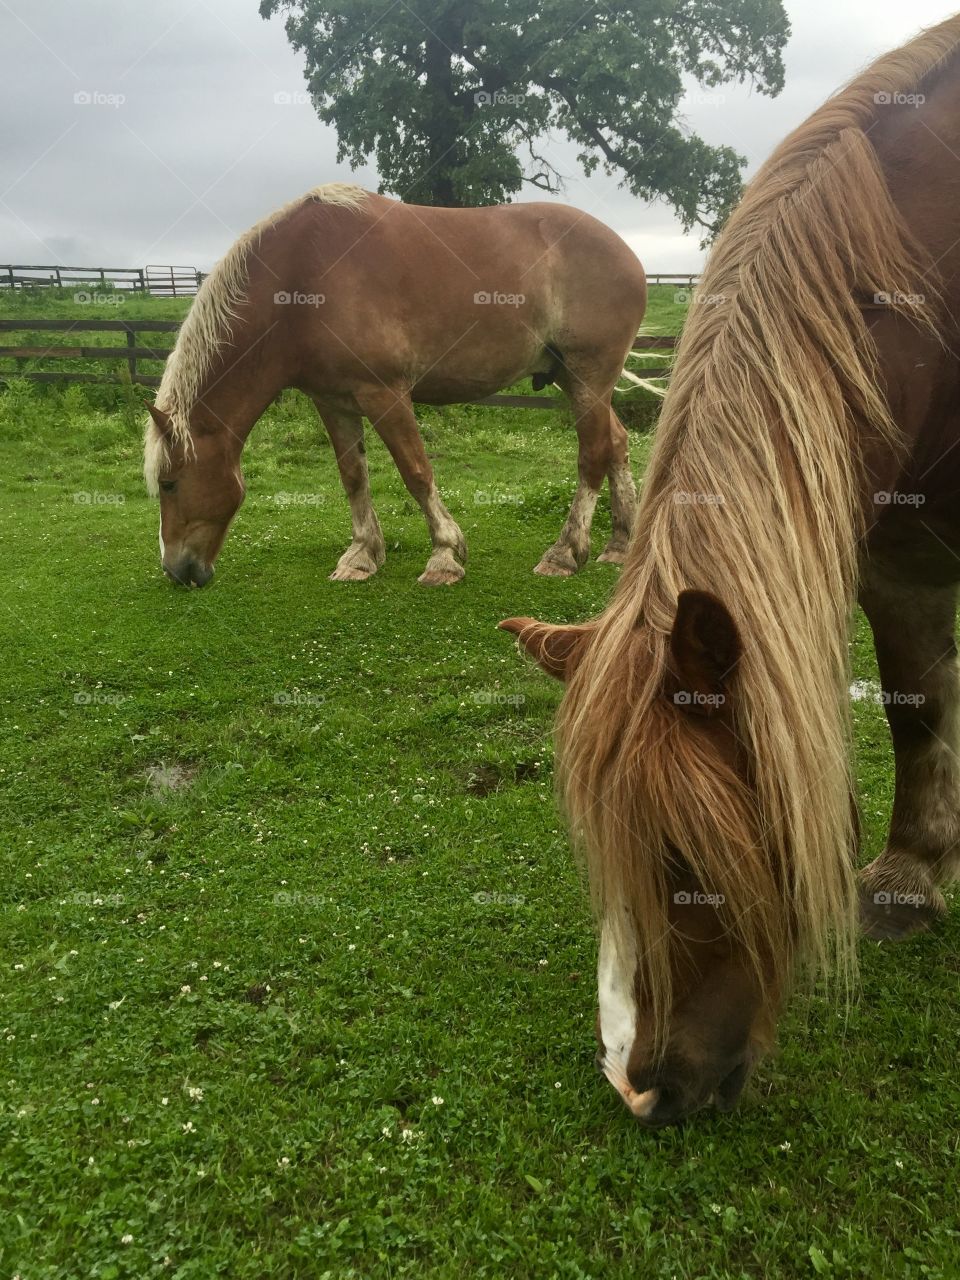 Halflinger and Belgian Draft Horse grazing together in a grassy pasture.